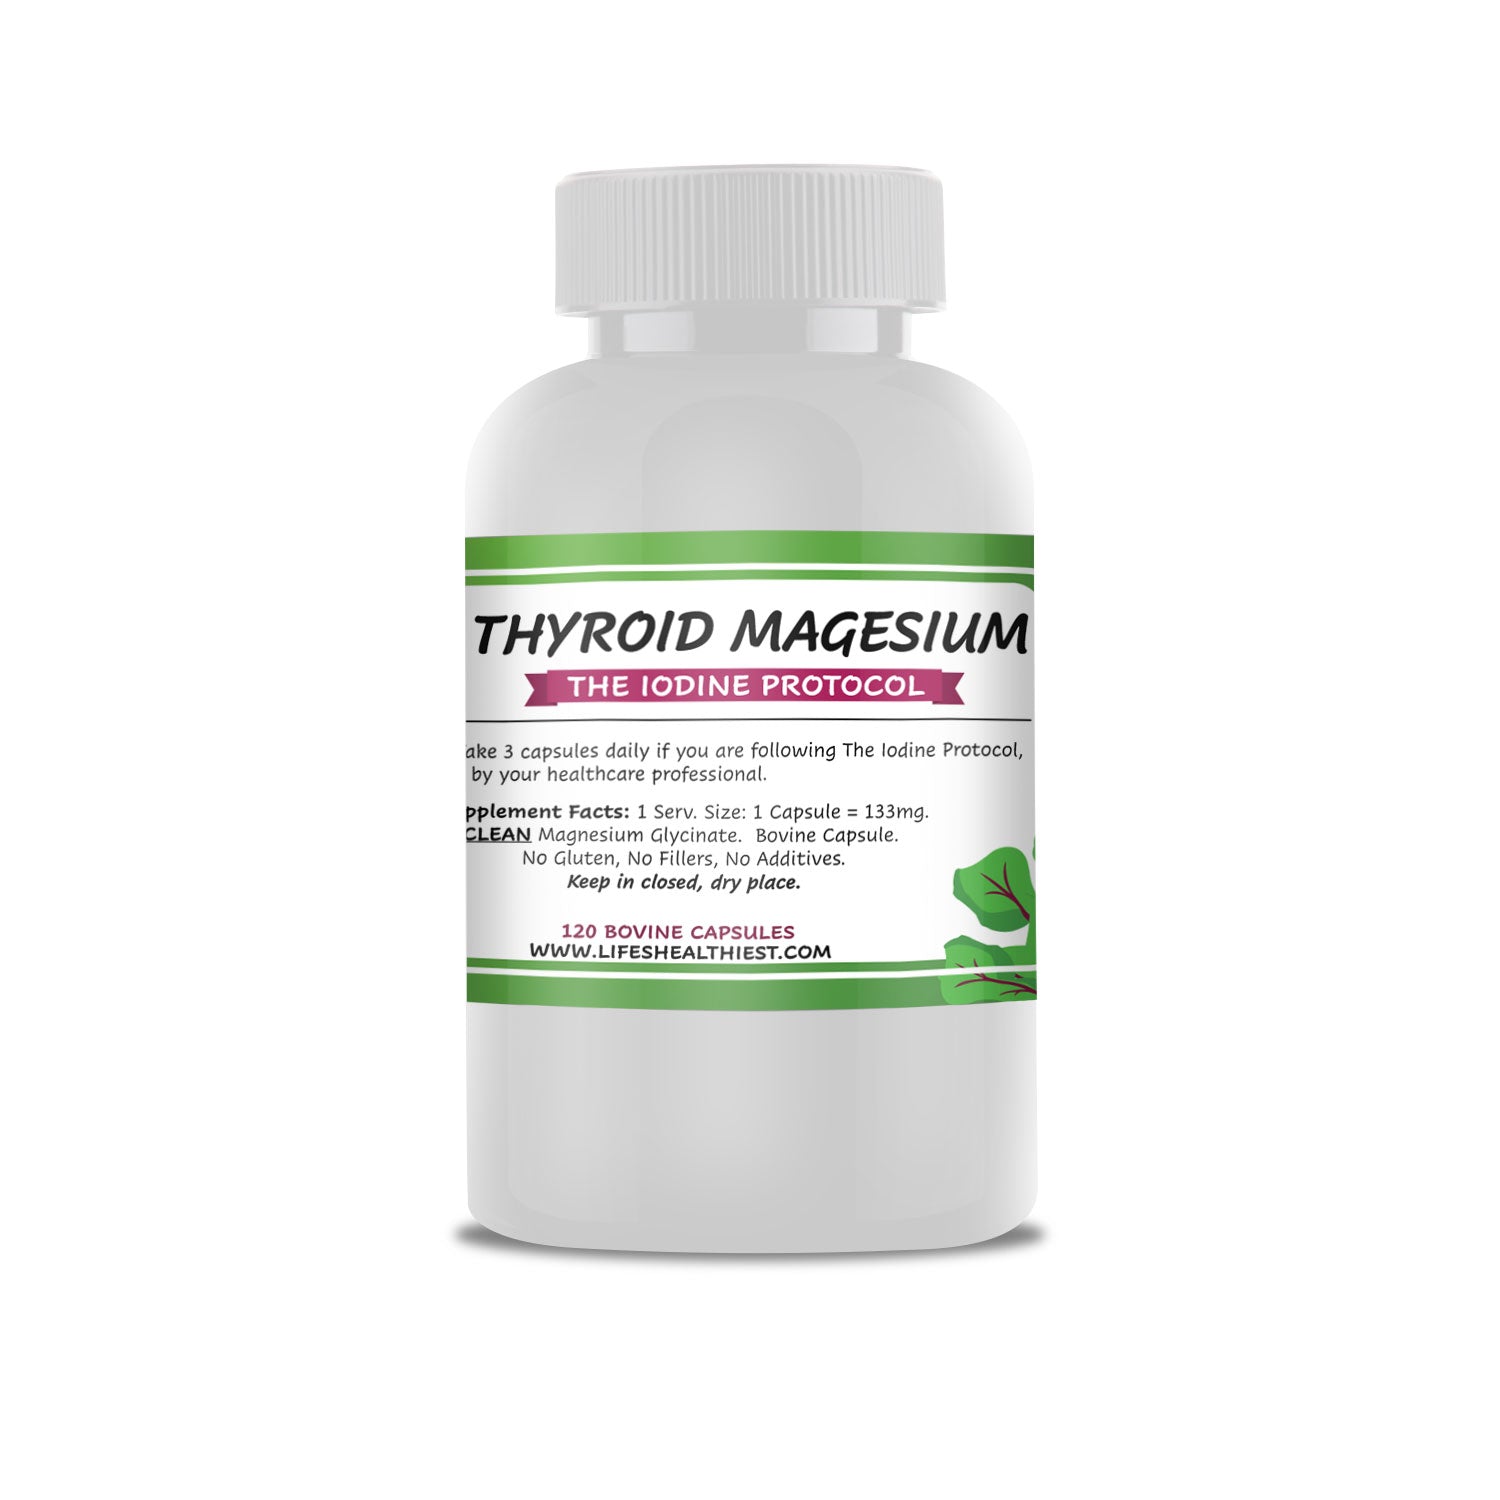 Life's Healthiest Thyroid Magnesium 120 capsules (The Iodine Protocol recommended)